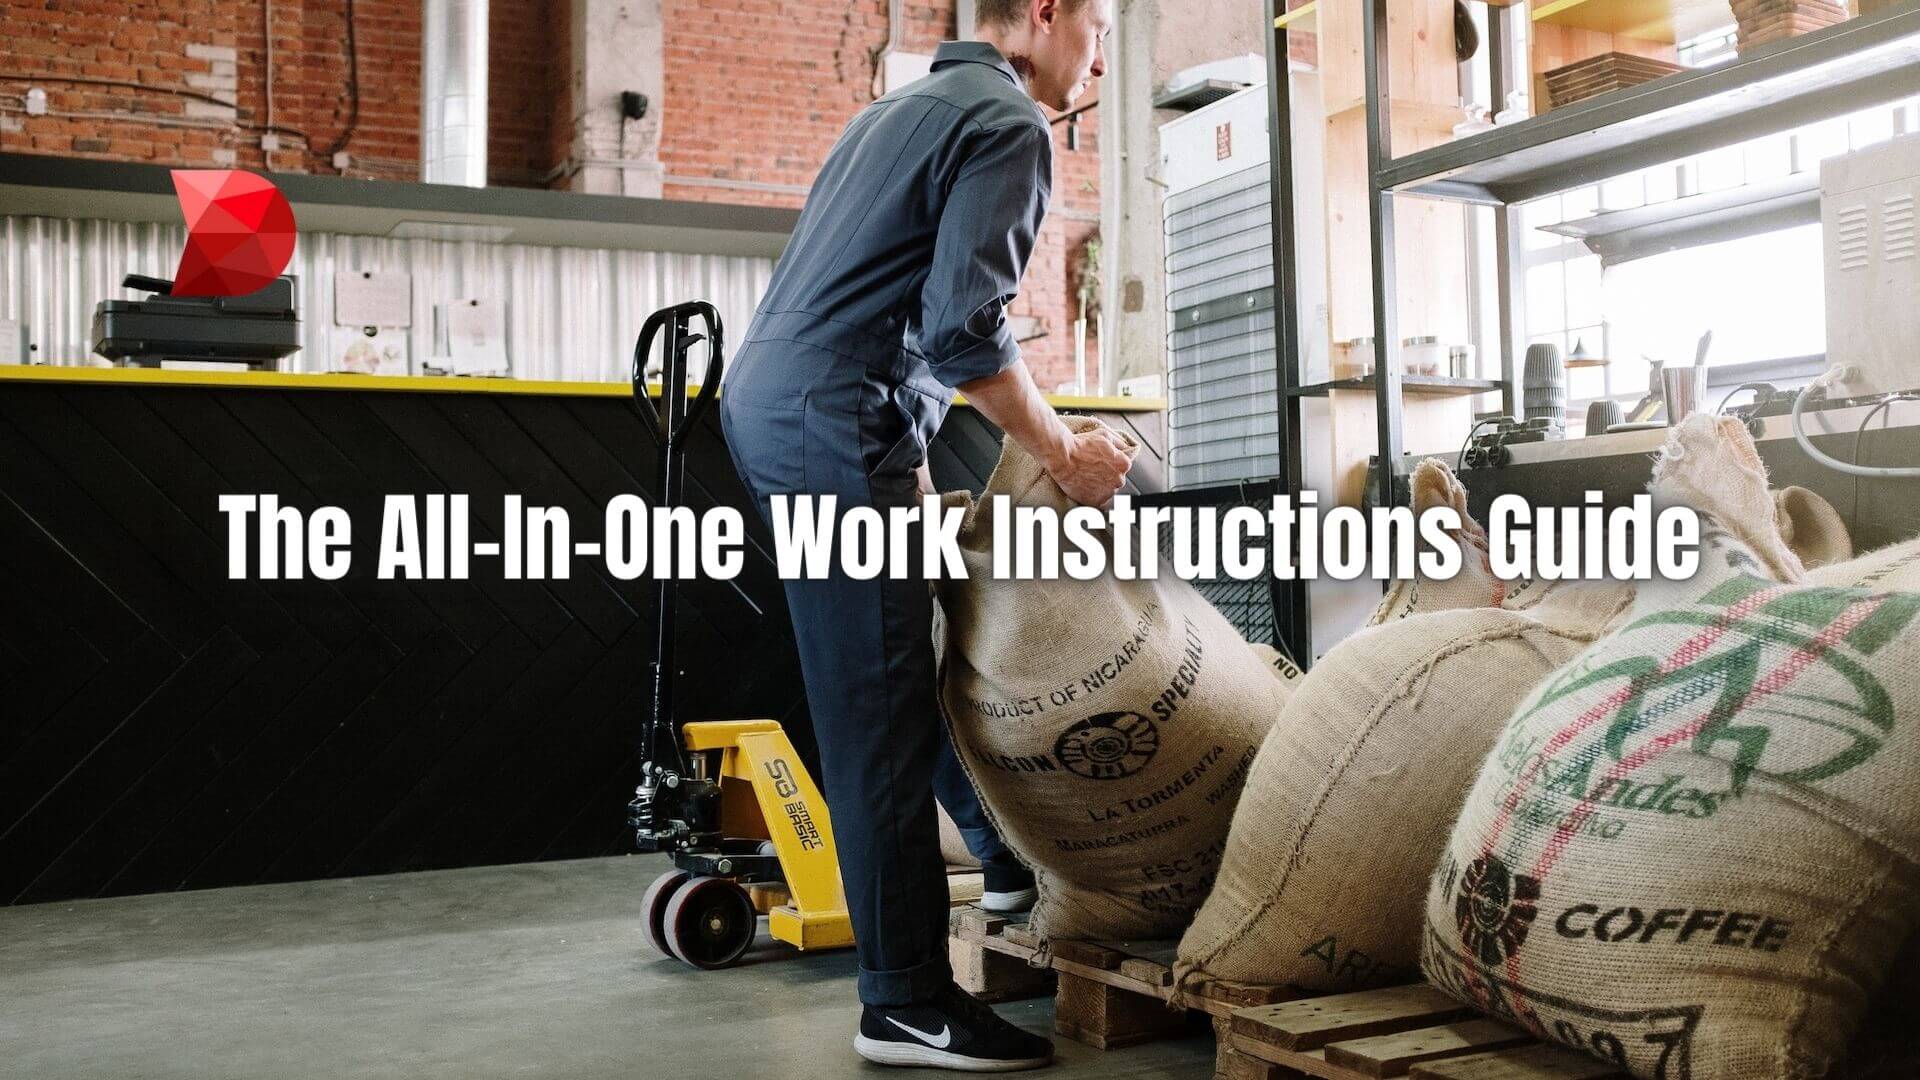 A work instruction guide helps employees perform their tasks accurately, effectively, and safely. Here's how to create one for your business.